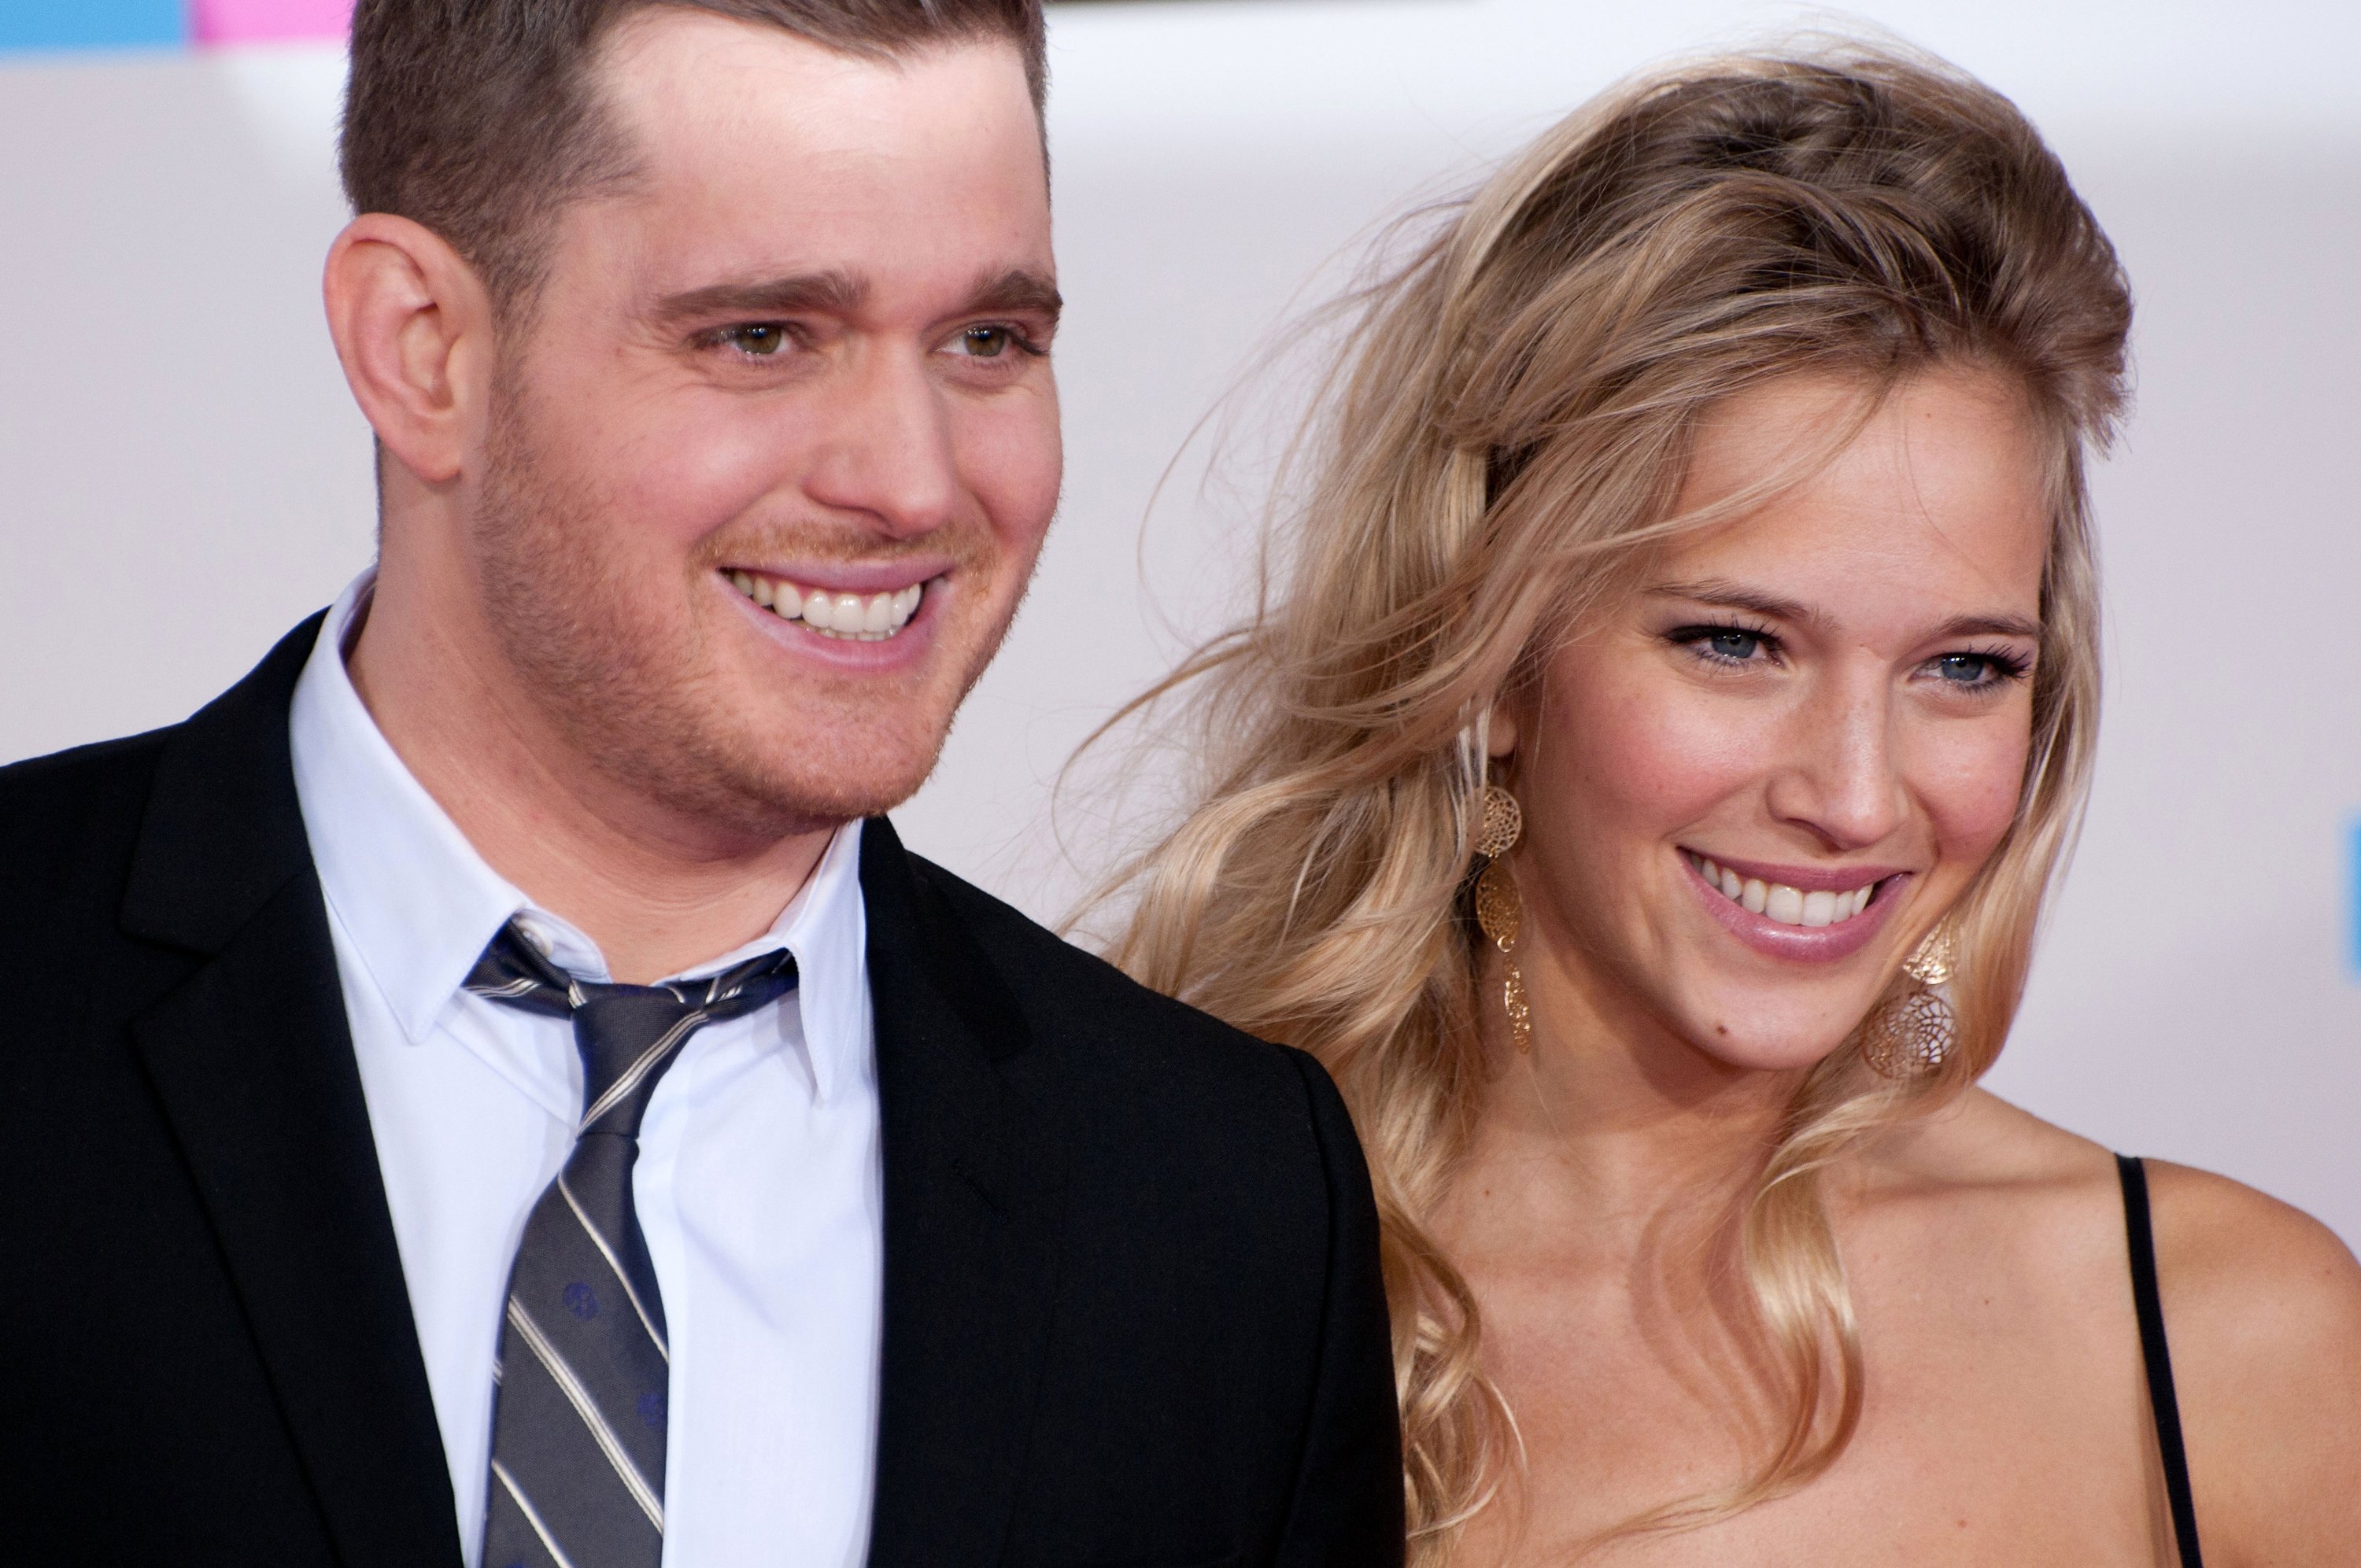 Michael Buble and Luisana Lopilato arrive at the 2010 American Music Awards held at Nokia Theatre L.A. Live on November 21, 2010 in Los Angeles, California | Source: Getty Images